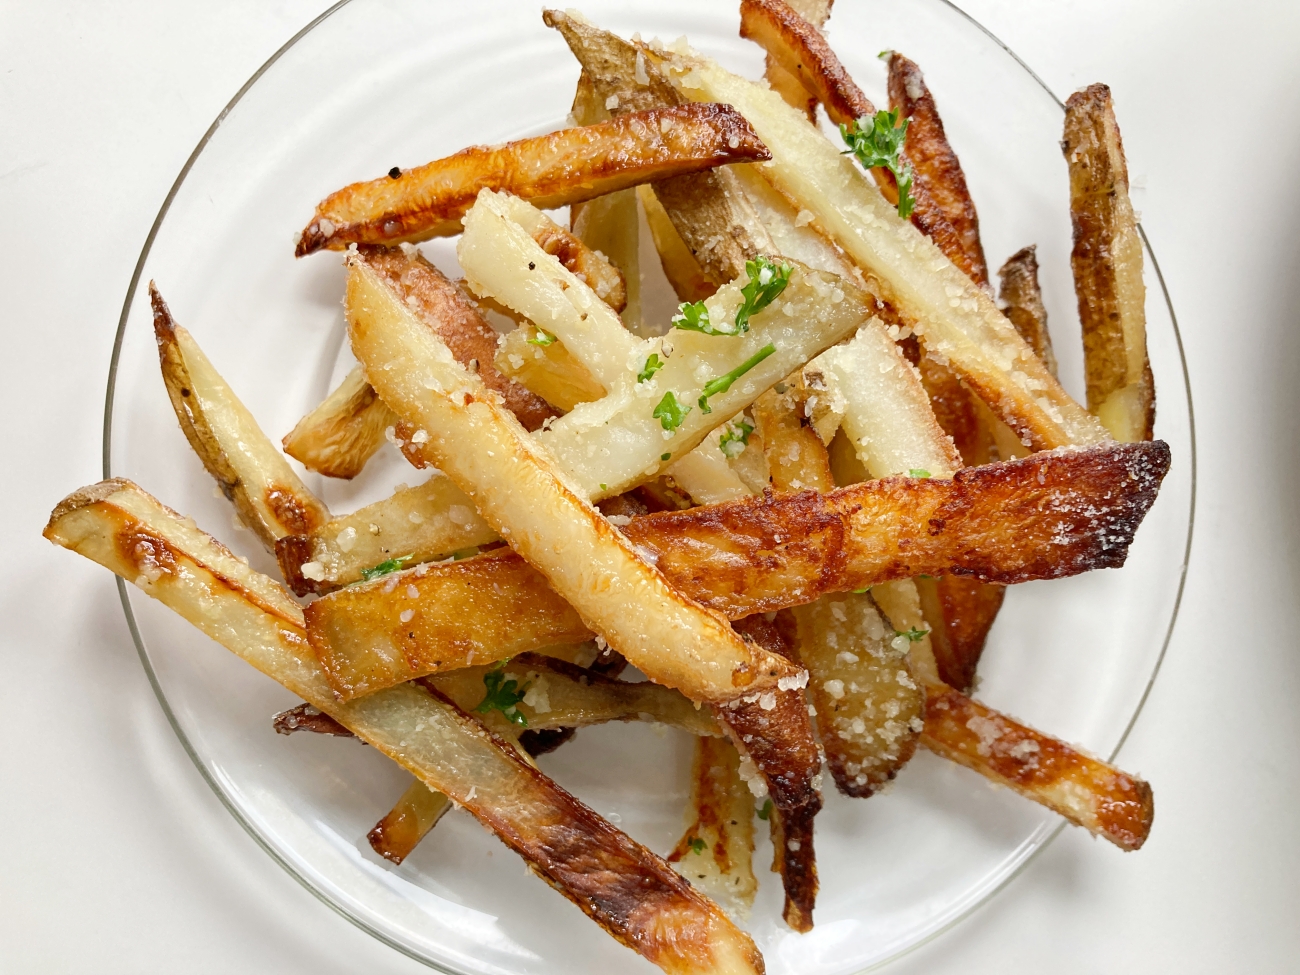 Oven-baked Truffle Fries